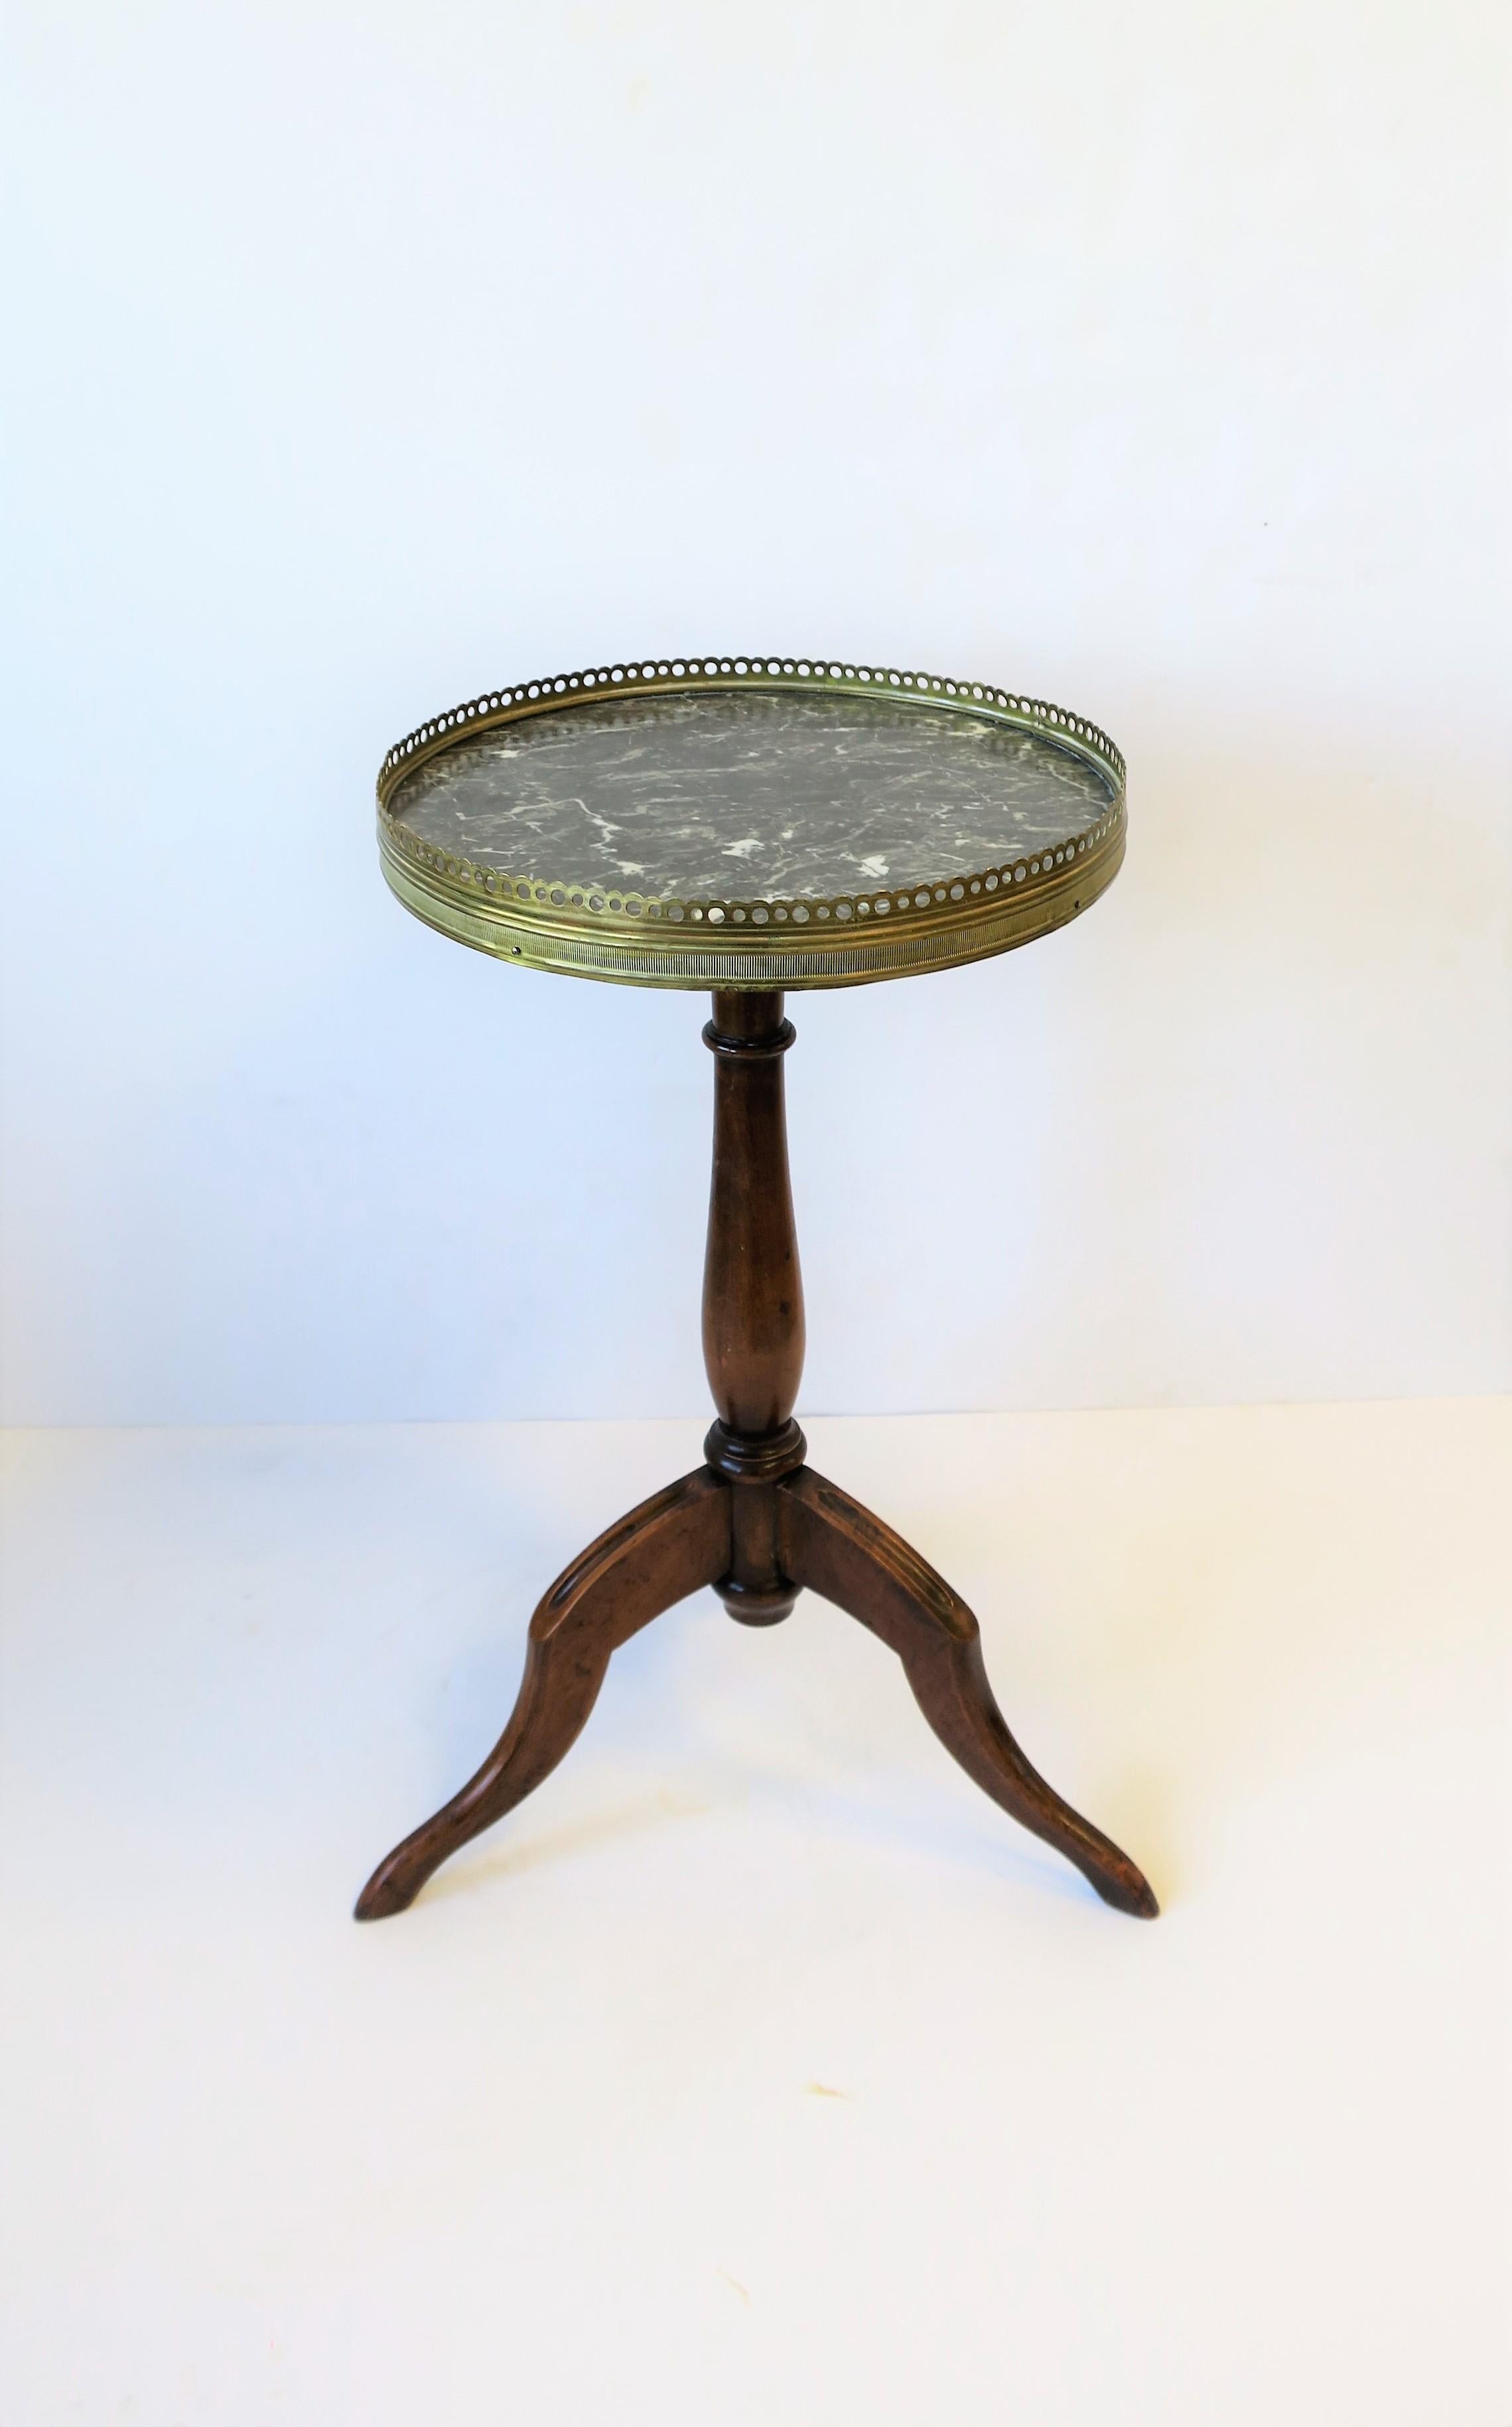 A French tripod brass, marble, and wood side or drinks table, circa Mid - Late 20th Century, France. Table has a black and white marble top, brass 'gallery' edge, and a wood tripod base. Marked 